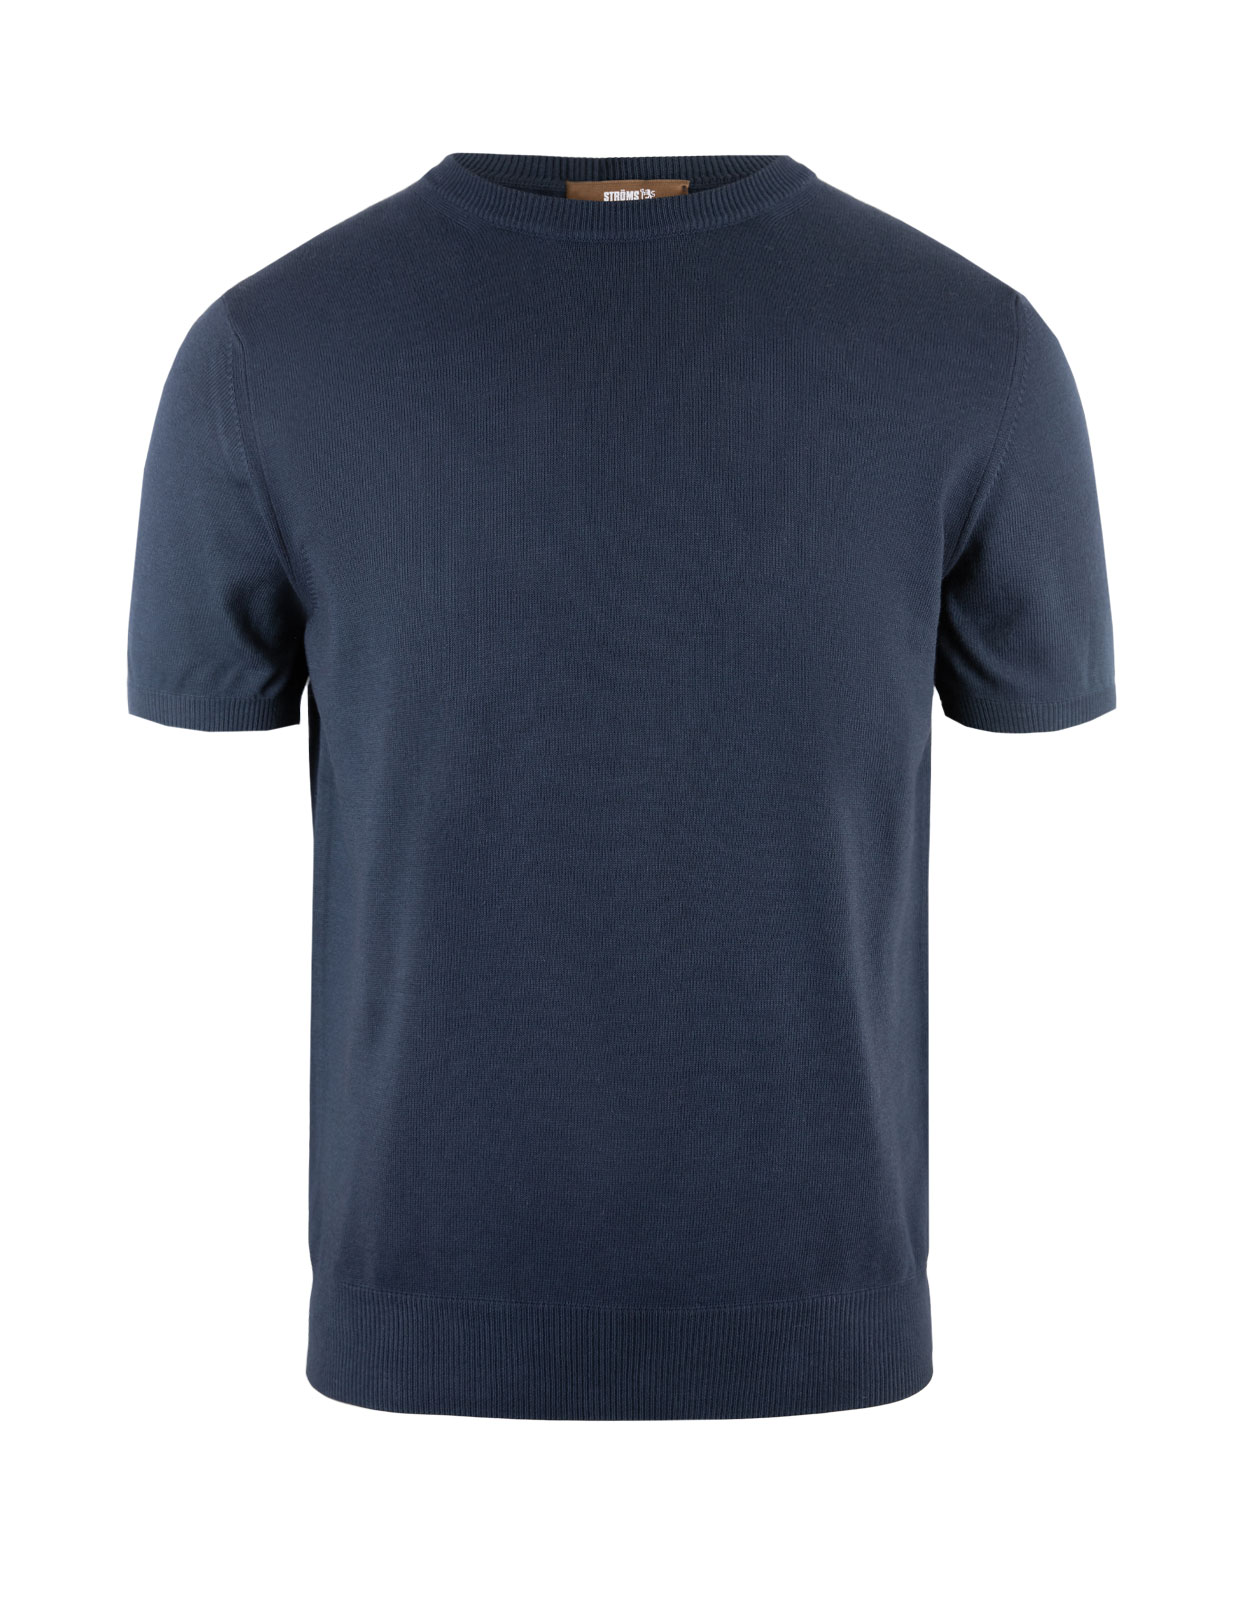 T-shirt Knitted Cotton Navy